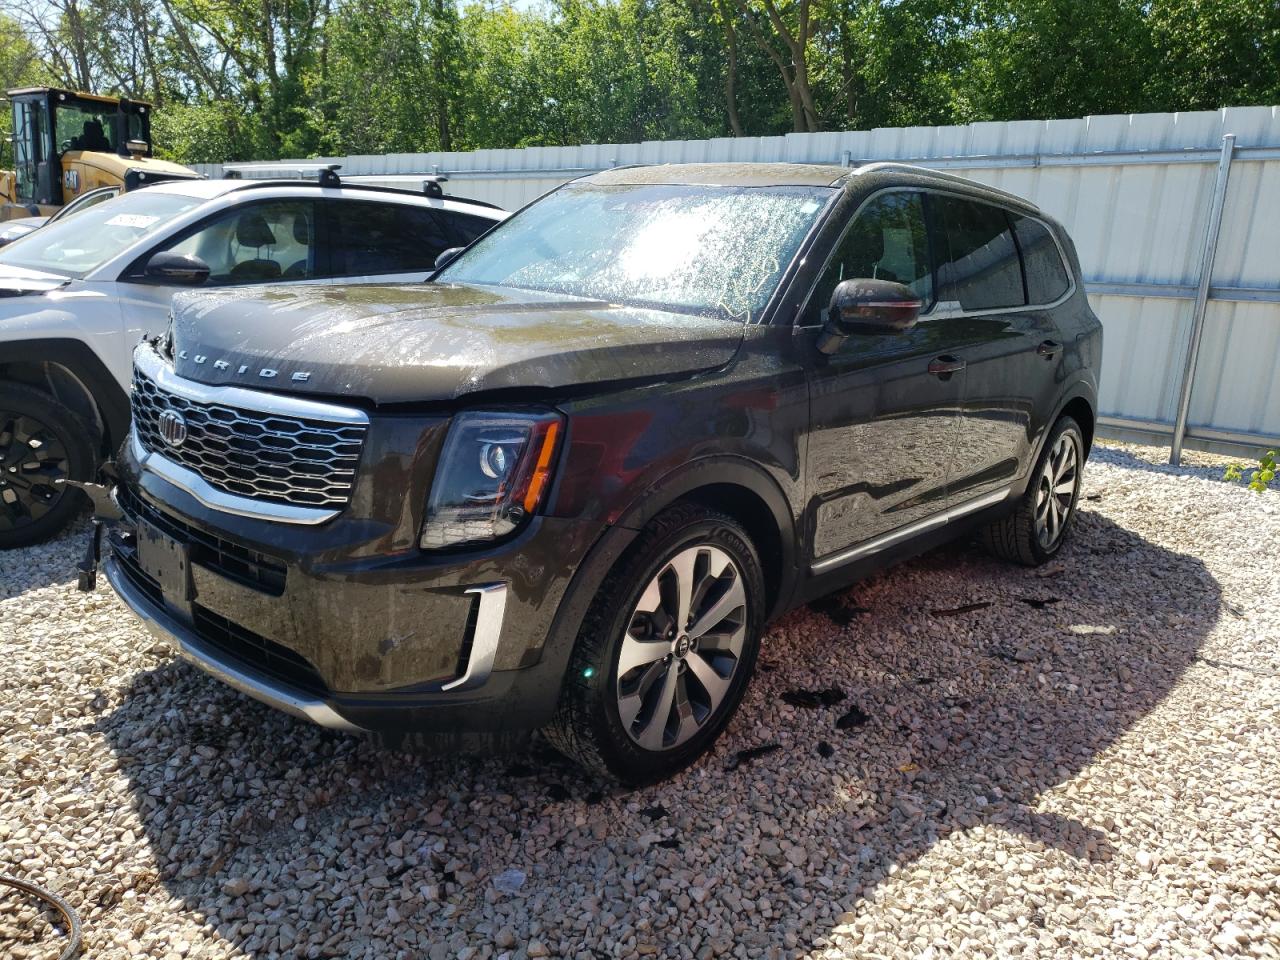 vin: 5XYP3DHC3LG053947 5XYP3DHC3LG053947 2020 kia telluride 3800 for Sale in 53132, Wi - Milwaukee South, Franklin, USA